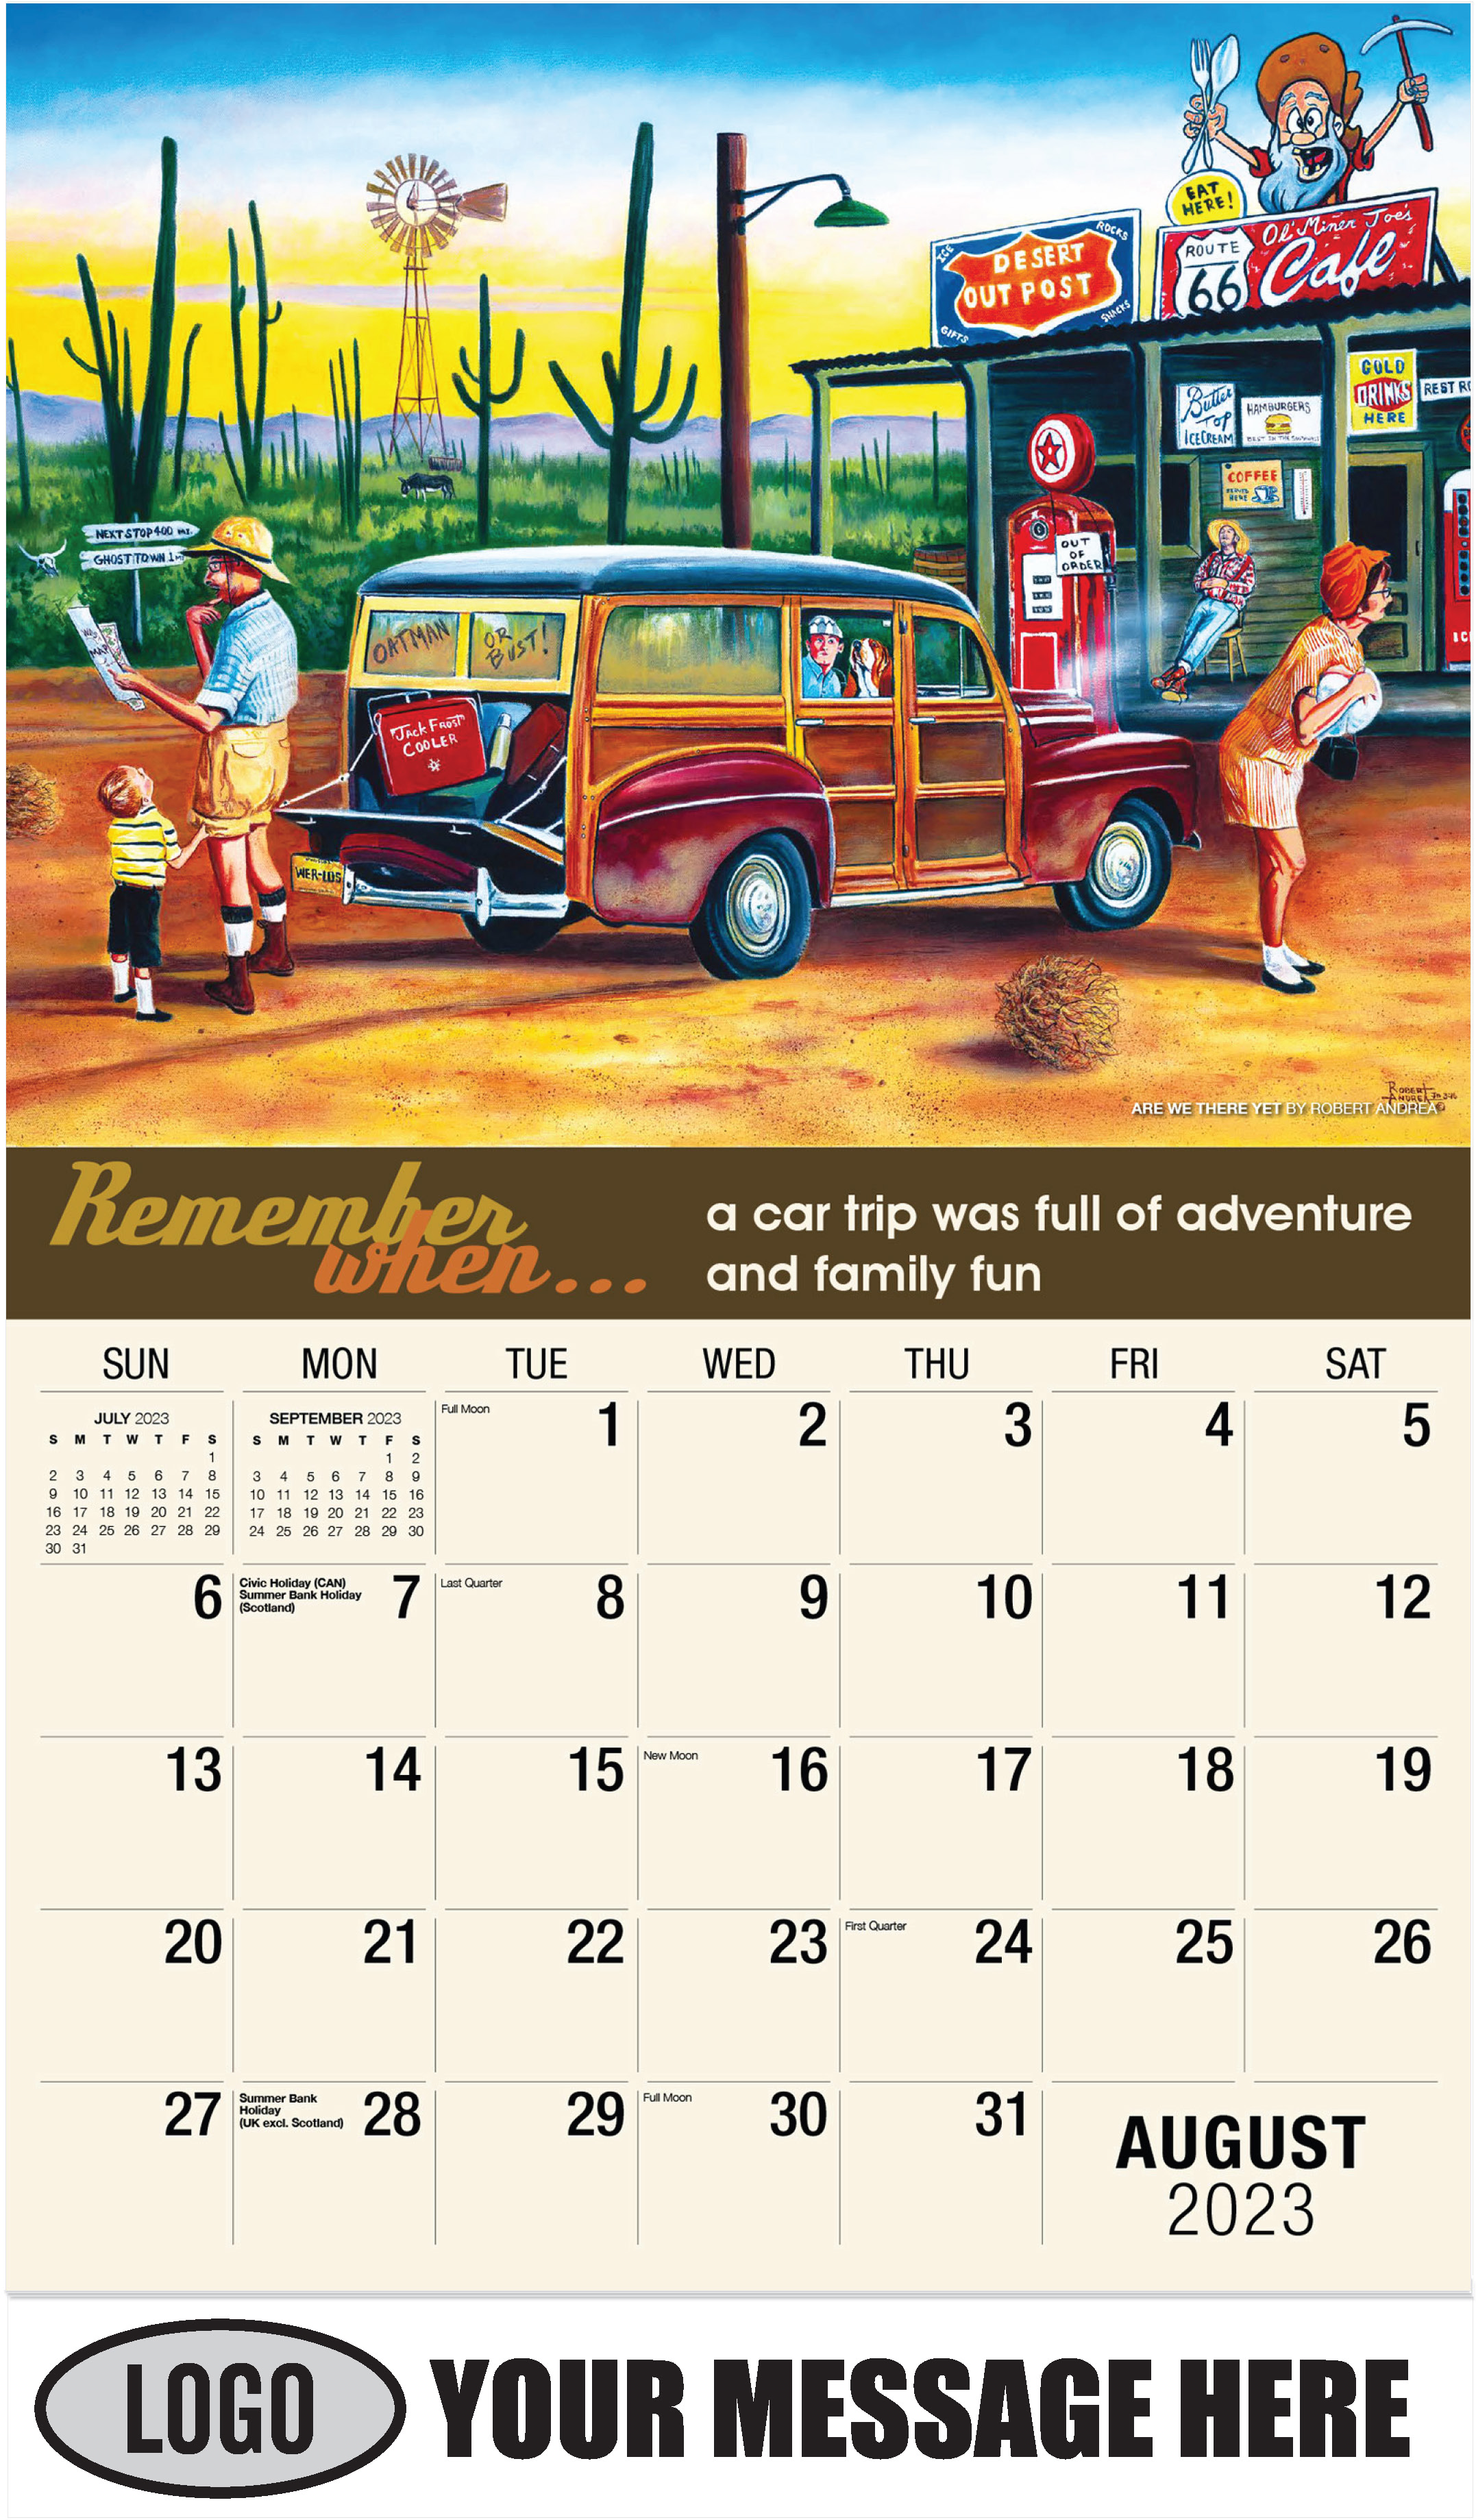 Are We There Yet by Robert Andrea - August - Remember When 2023 Promotional Calendar